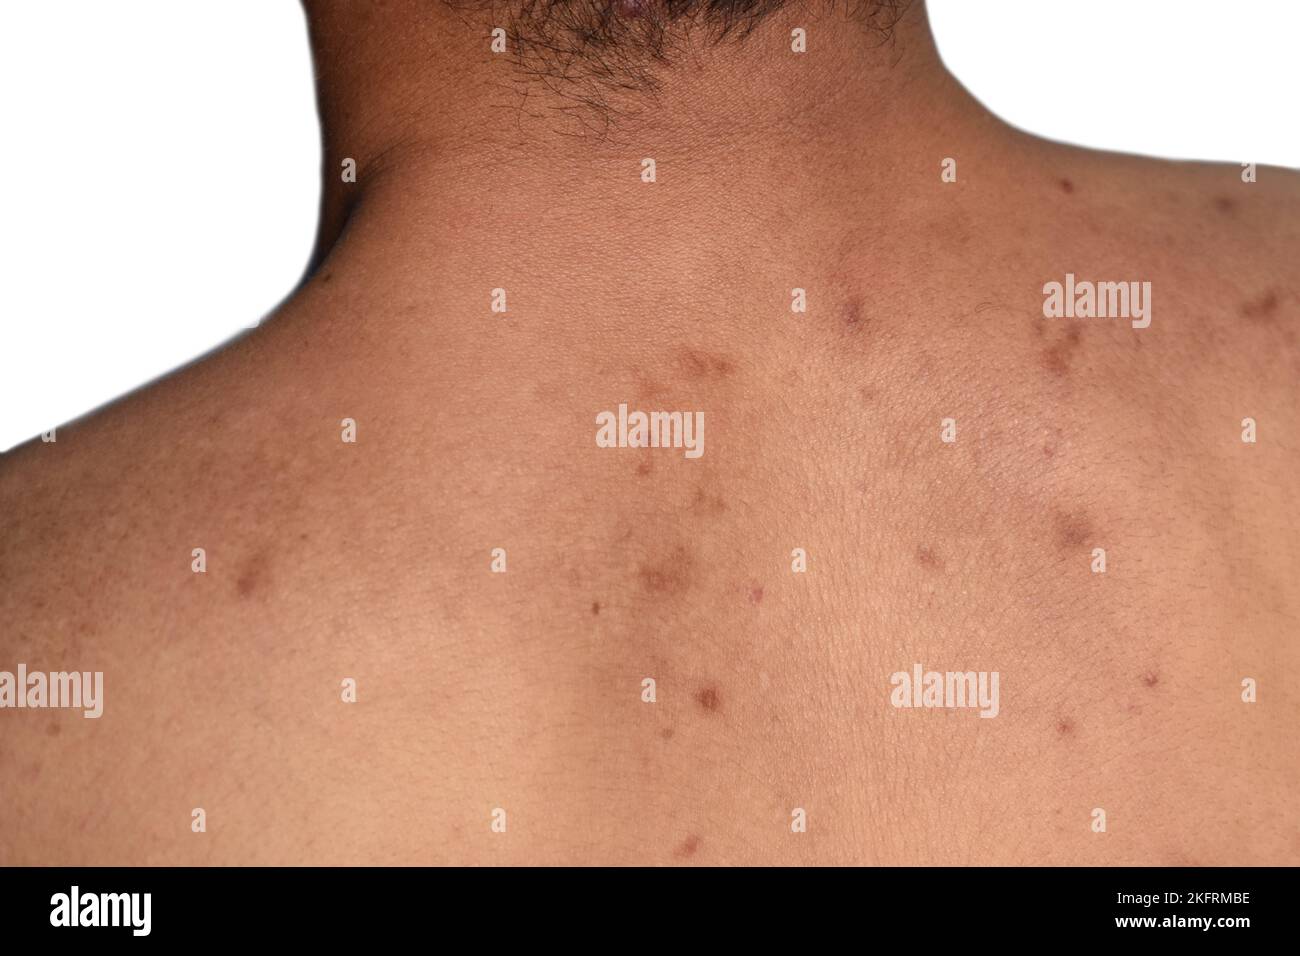 Black spots and scars on the back of Asian, Myanmar man Stock Photo